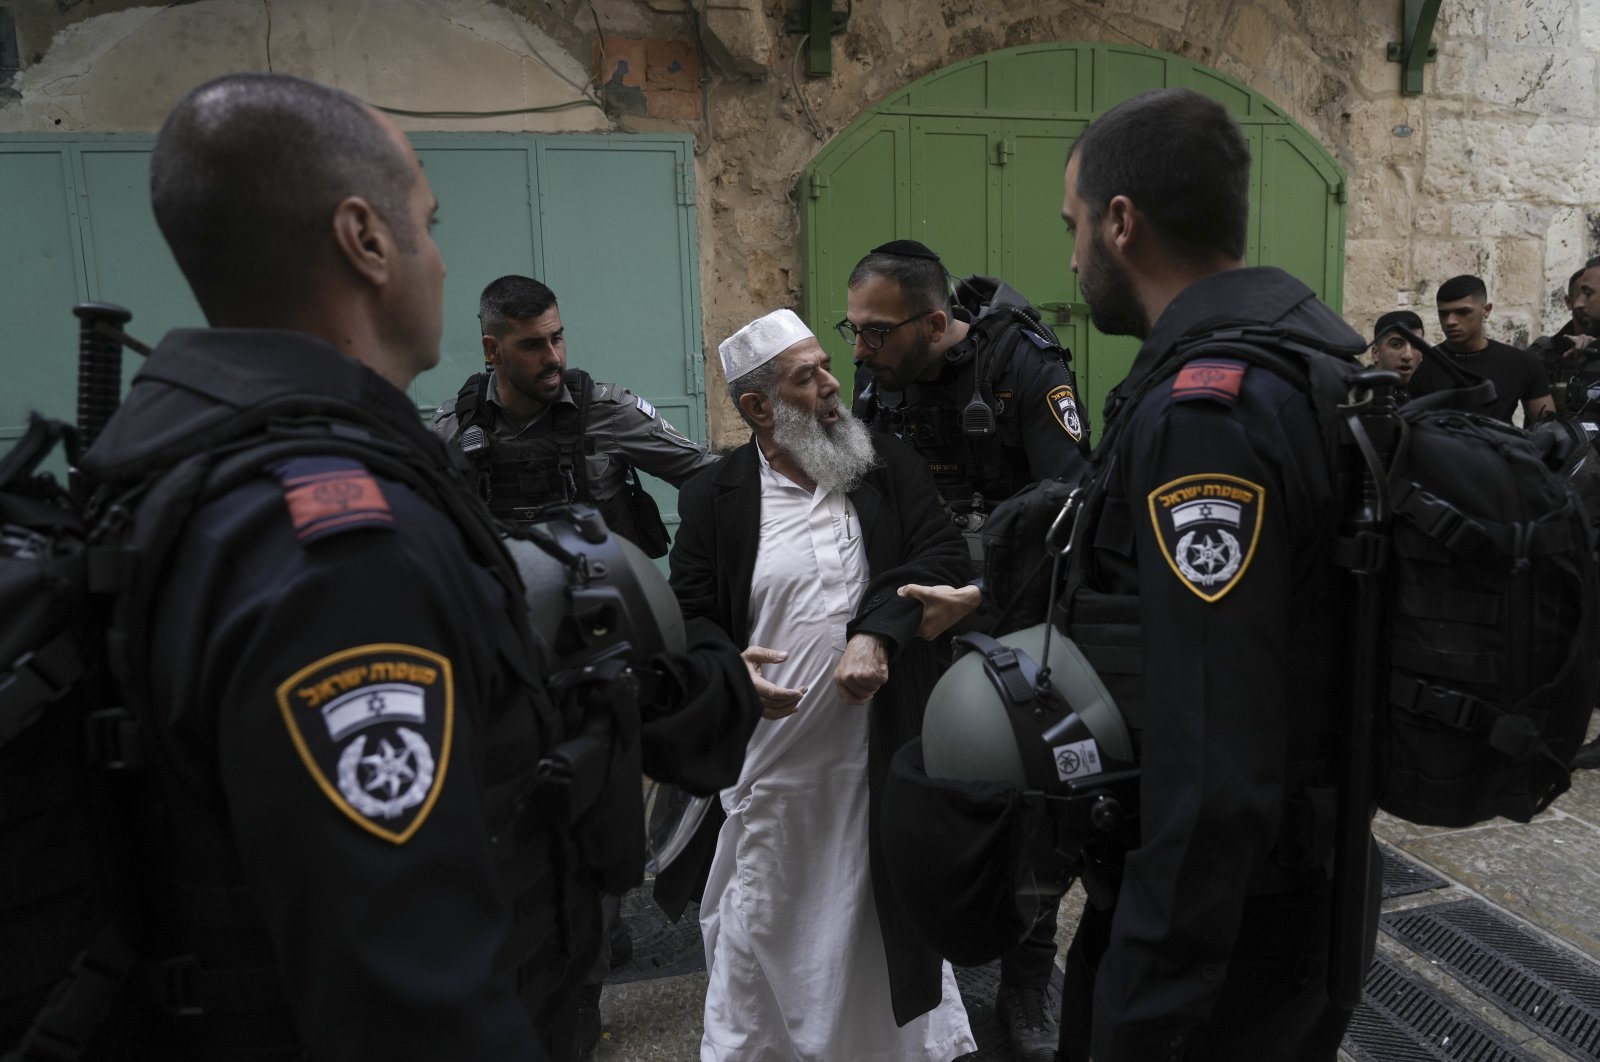 Israel police argue with a Palestinian worshiper in the Old City, East Jerusalem, occupied Palestine, April 17, 2022. (AP Photo)